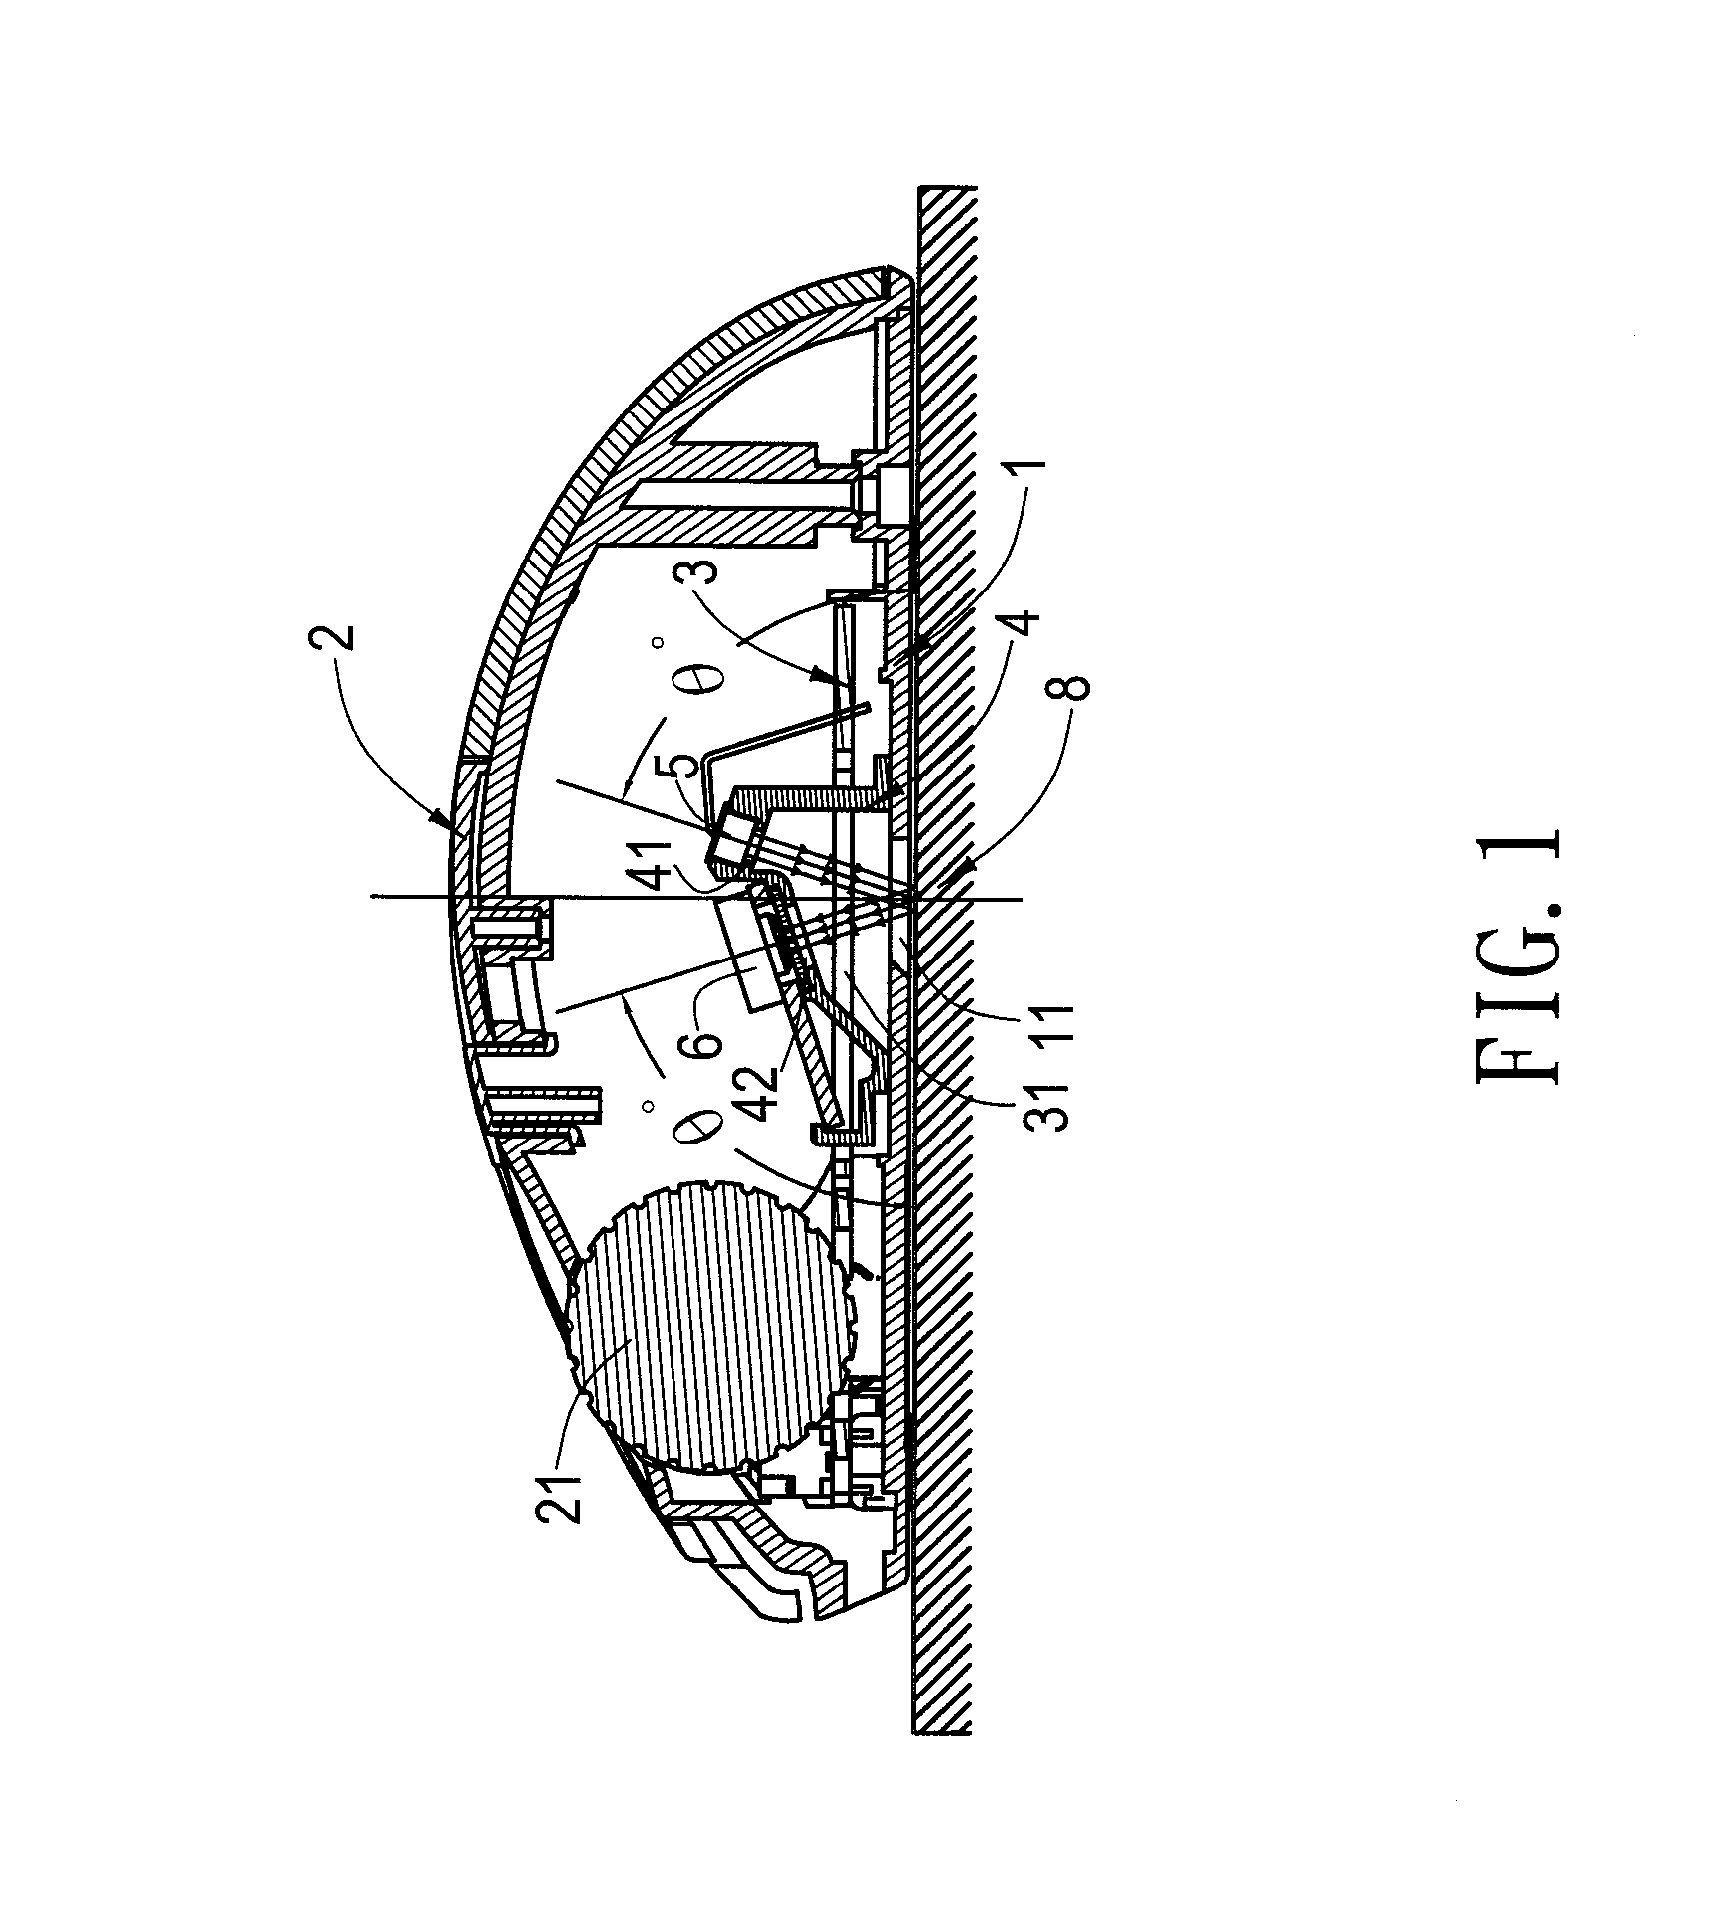 Optical mouse having an optical structure capable of high sensibility